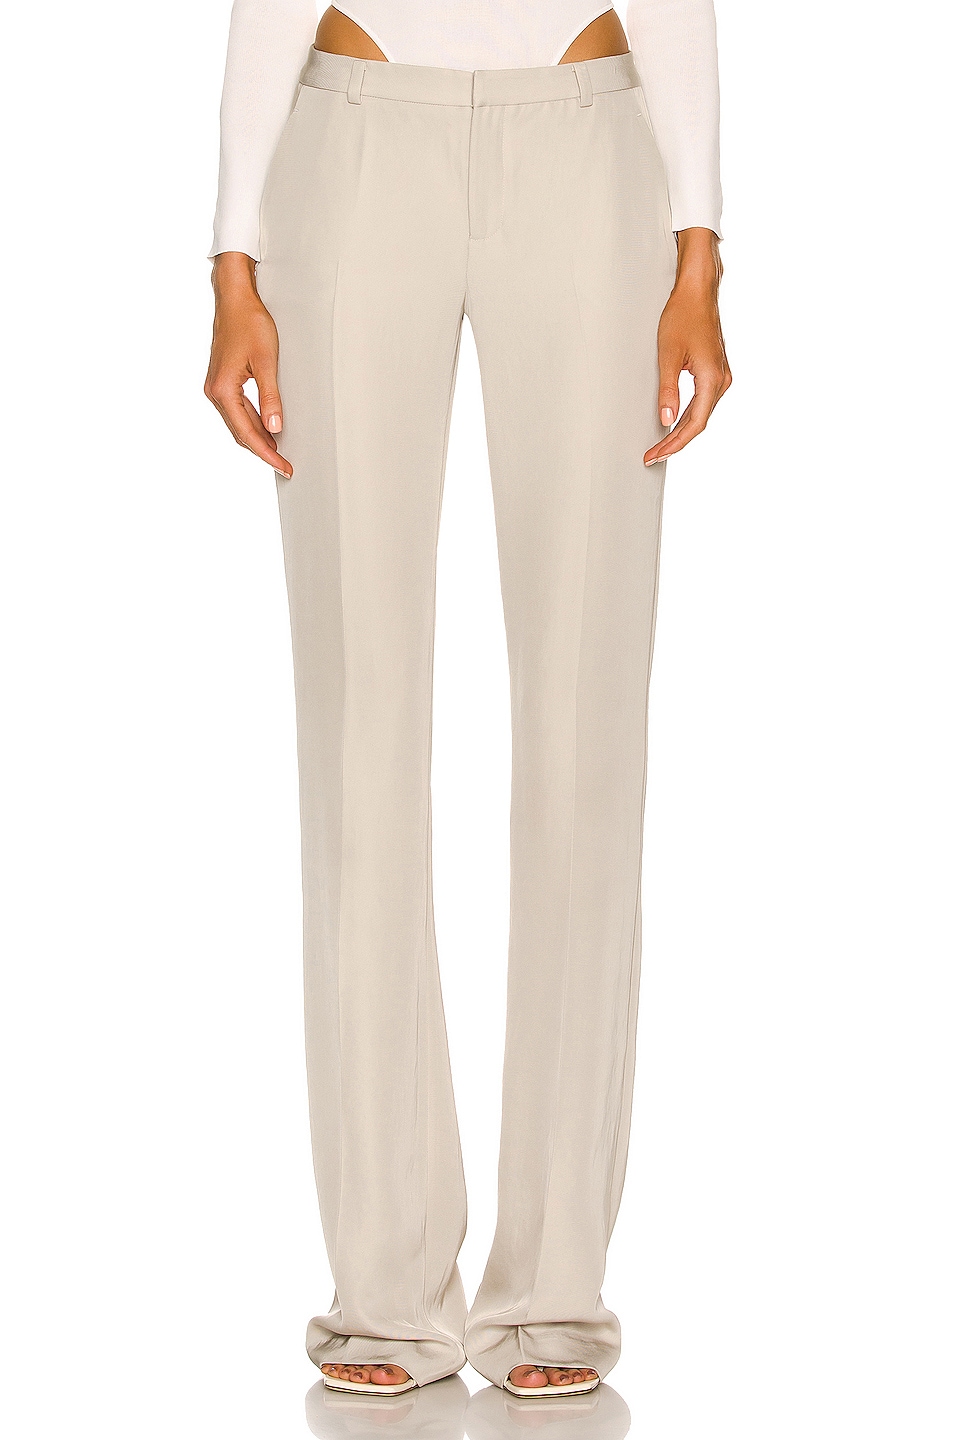 Image 1 of Aya Muse Pavia Pant in Sand